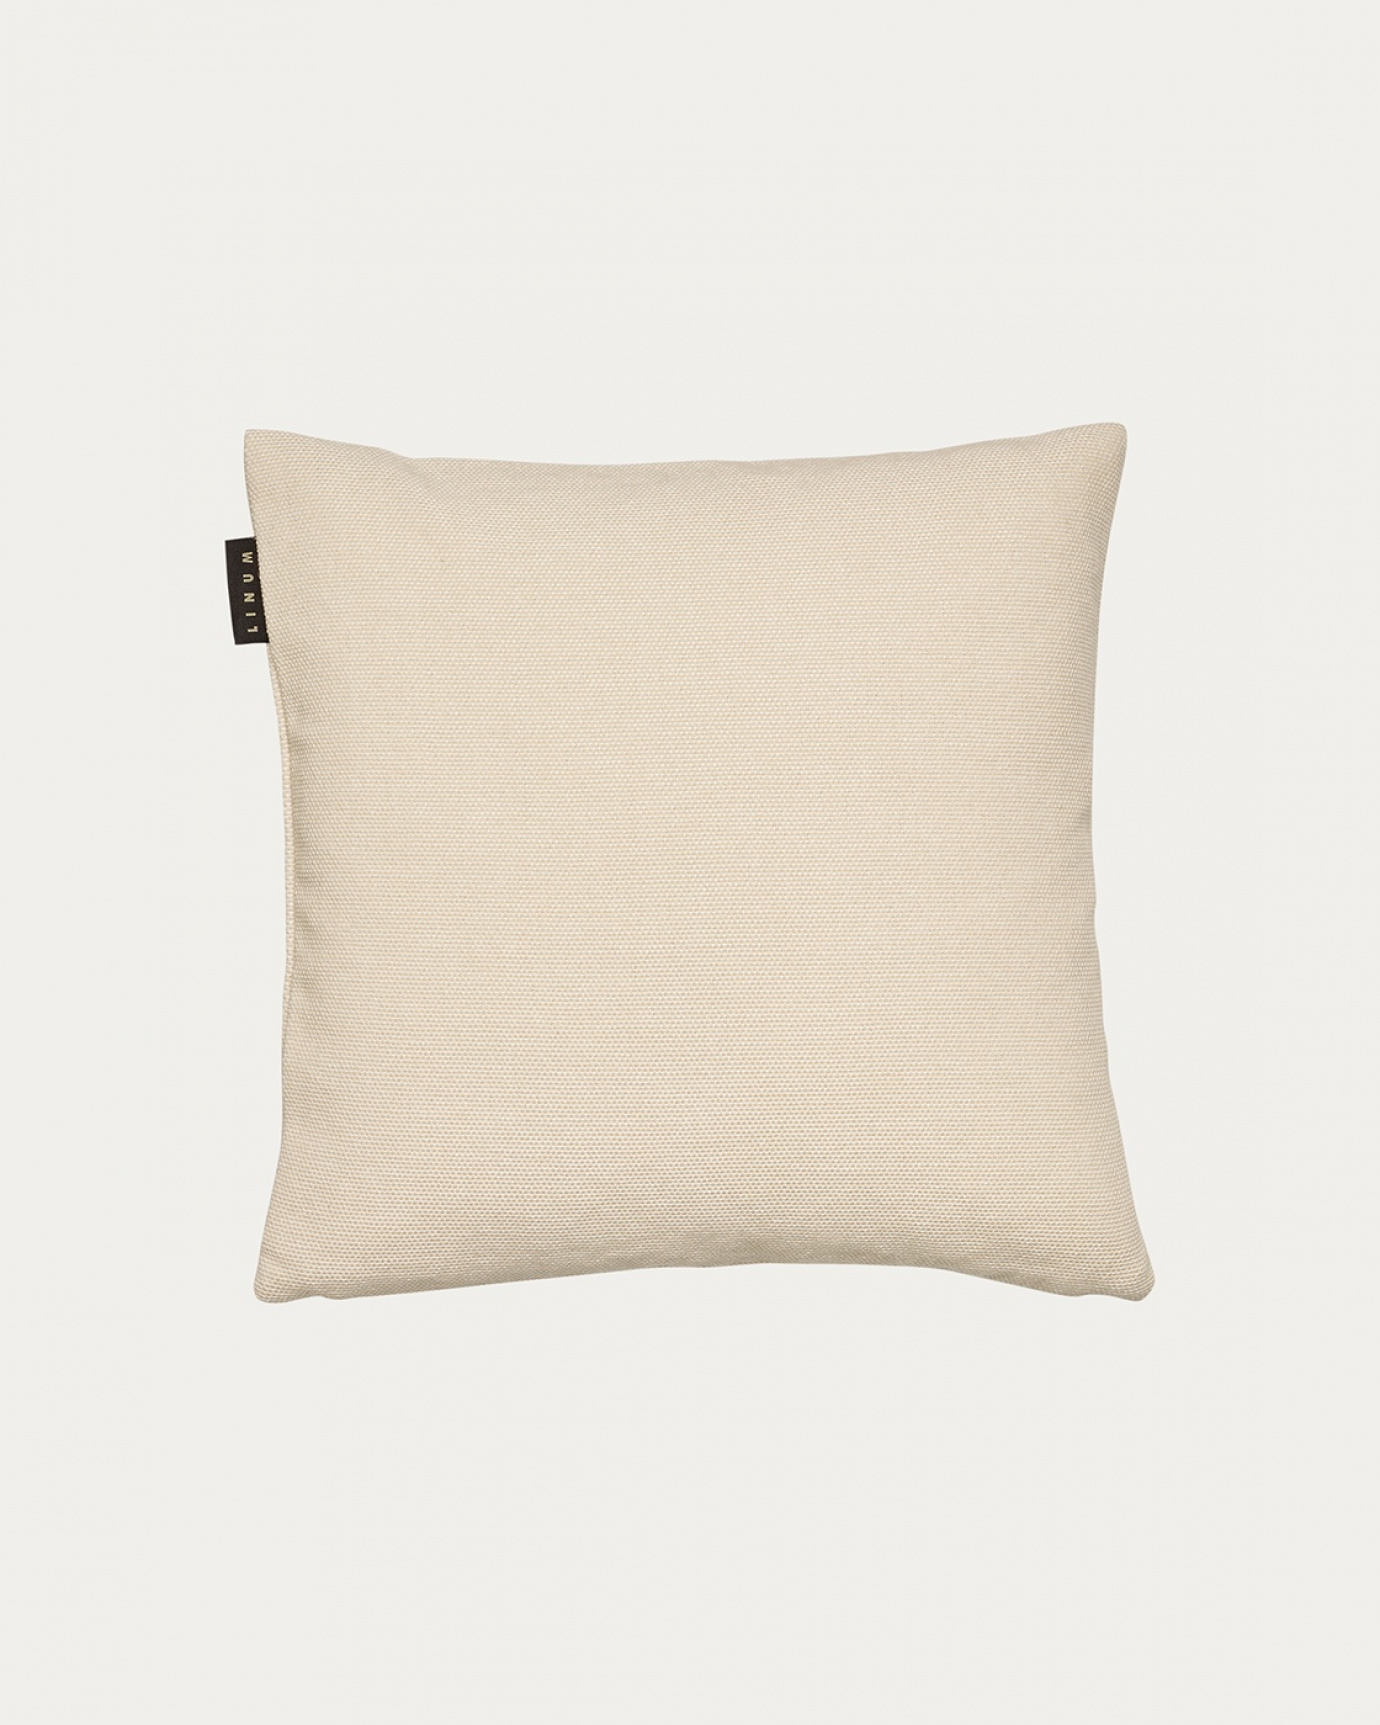 Product image creamy beige PEPPER cushion cover made of soft cotton from LINUM DESIGN. Easy to wash and durable for generations. Size 40x40 cm.